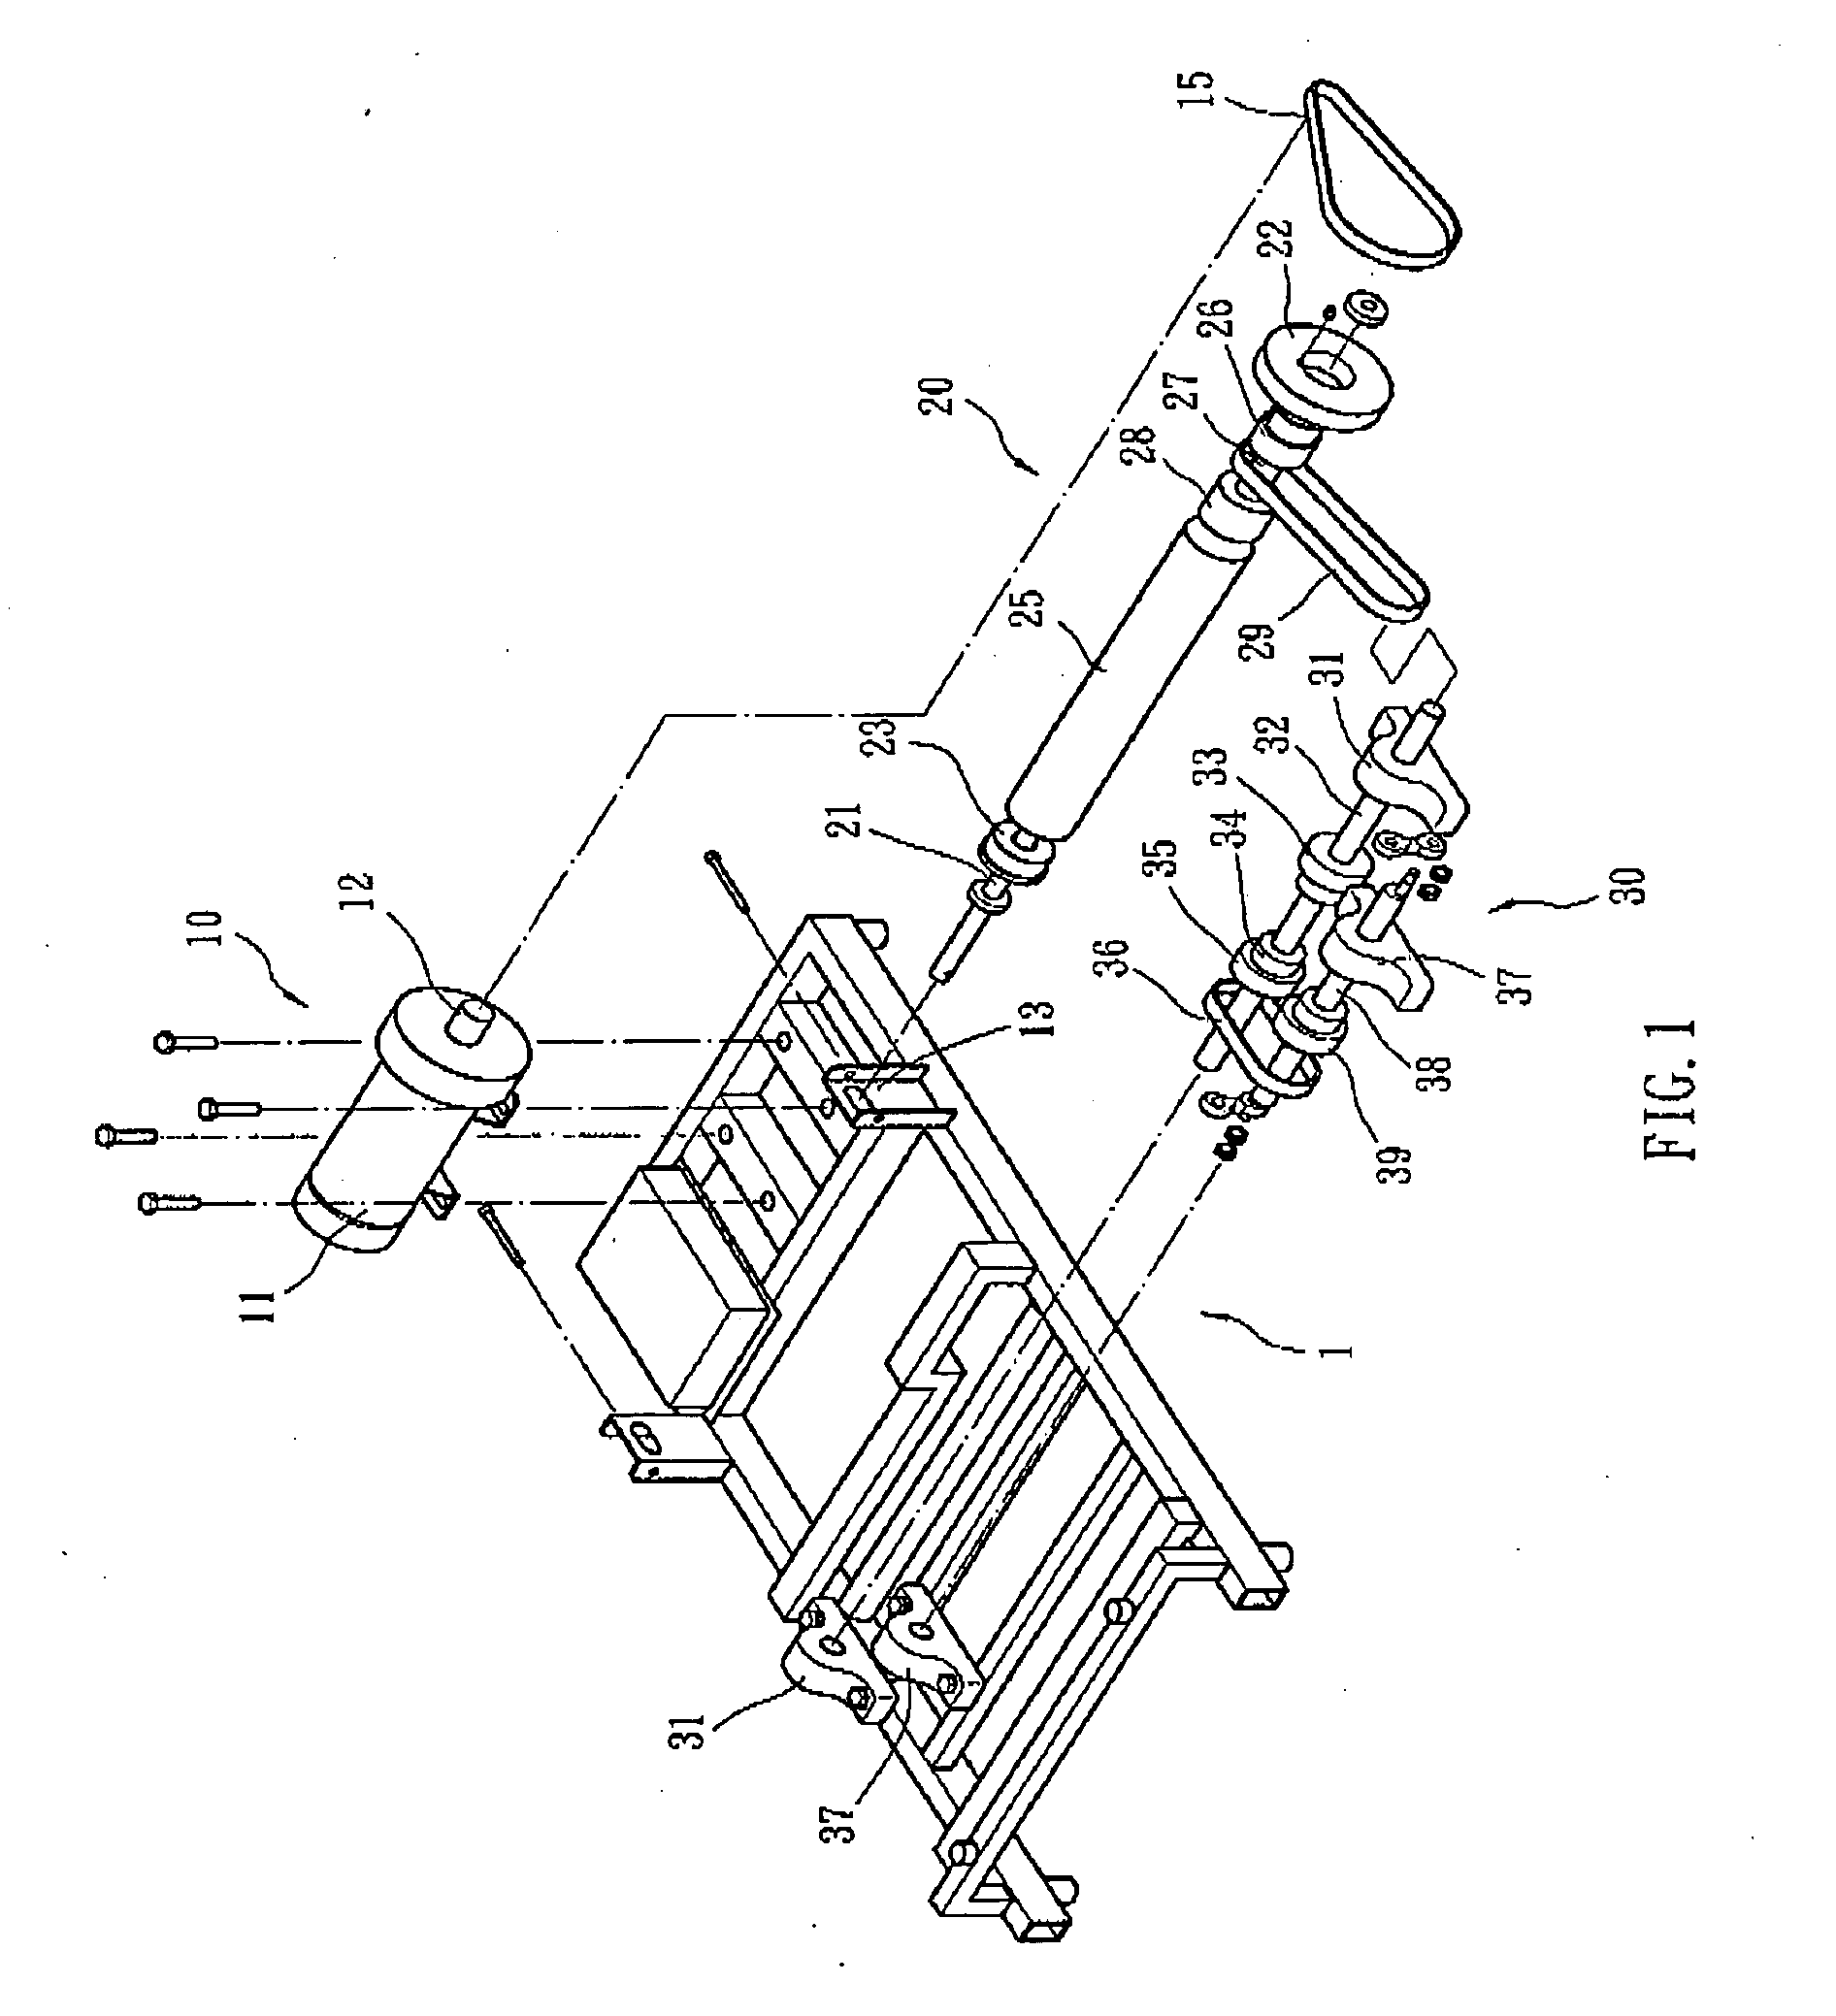 Mechanism Using a Single Power Source to Provide Two Exercising Functions for a Physical Exerciser